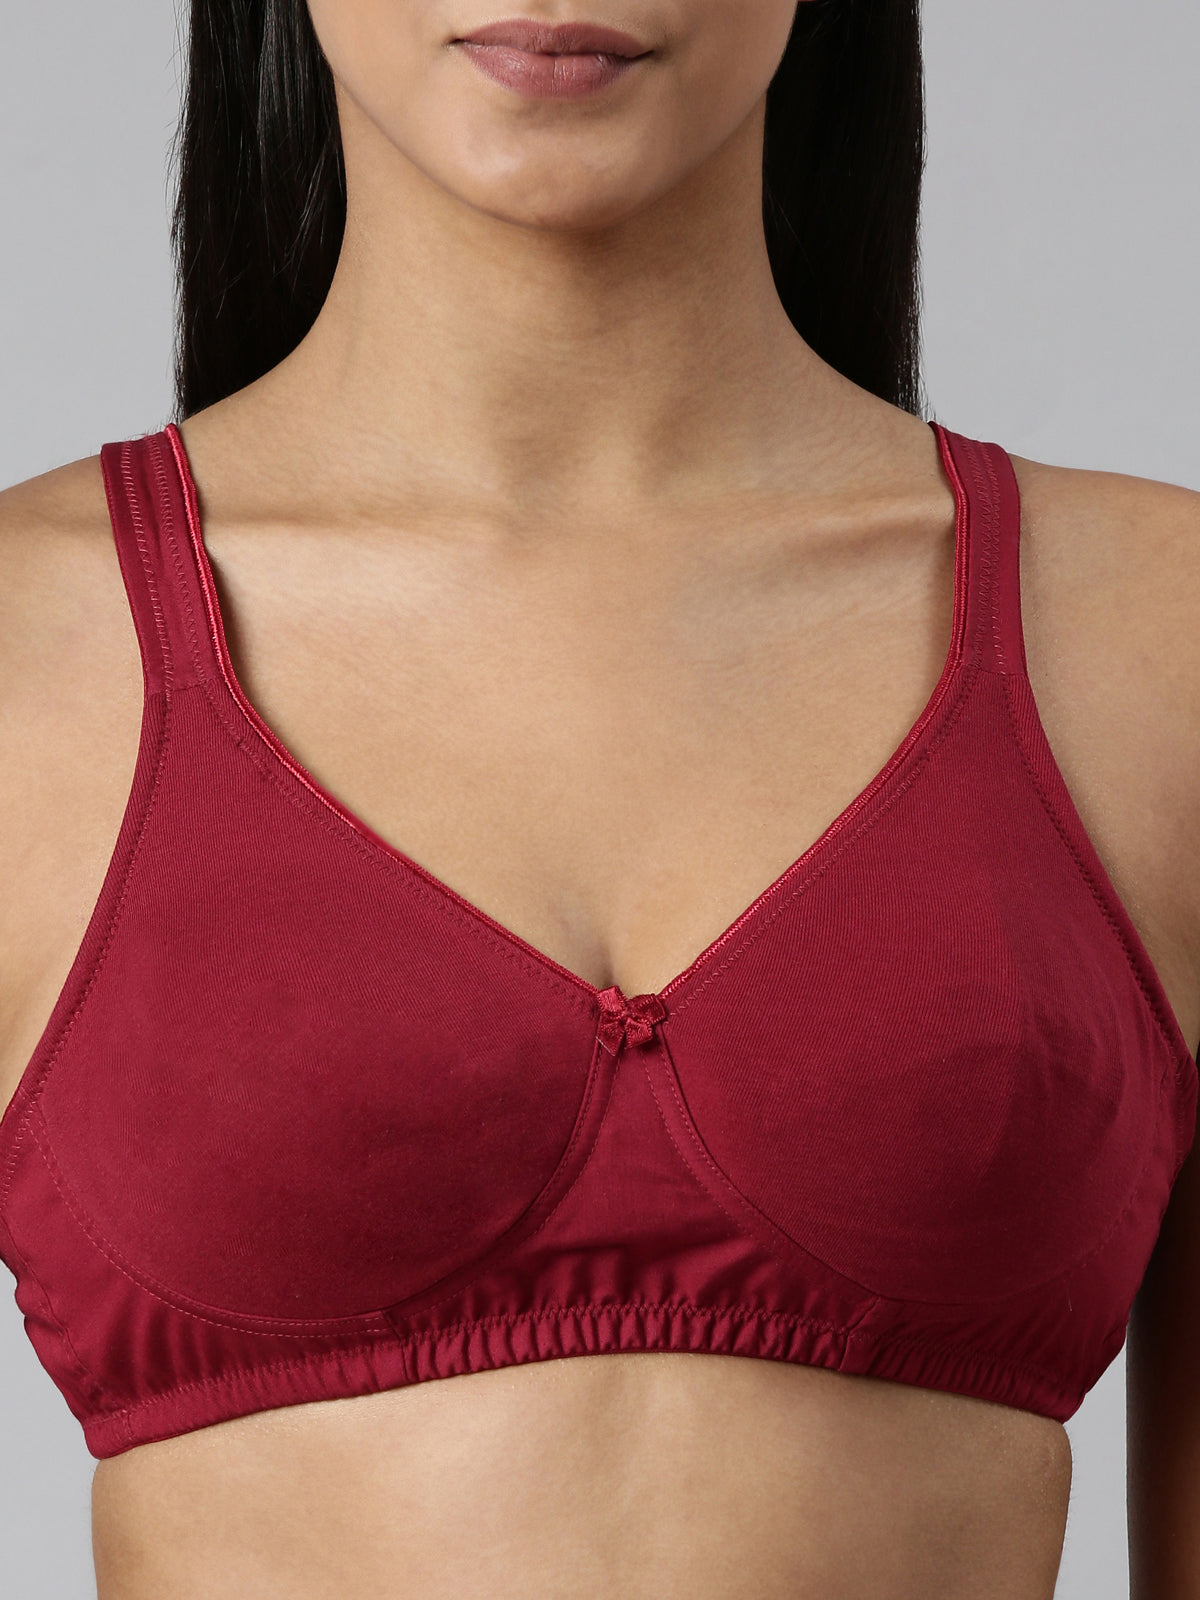 blossom-circlet-maroon1-woven knitted-support bra